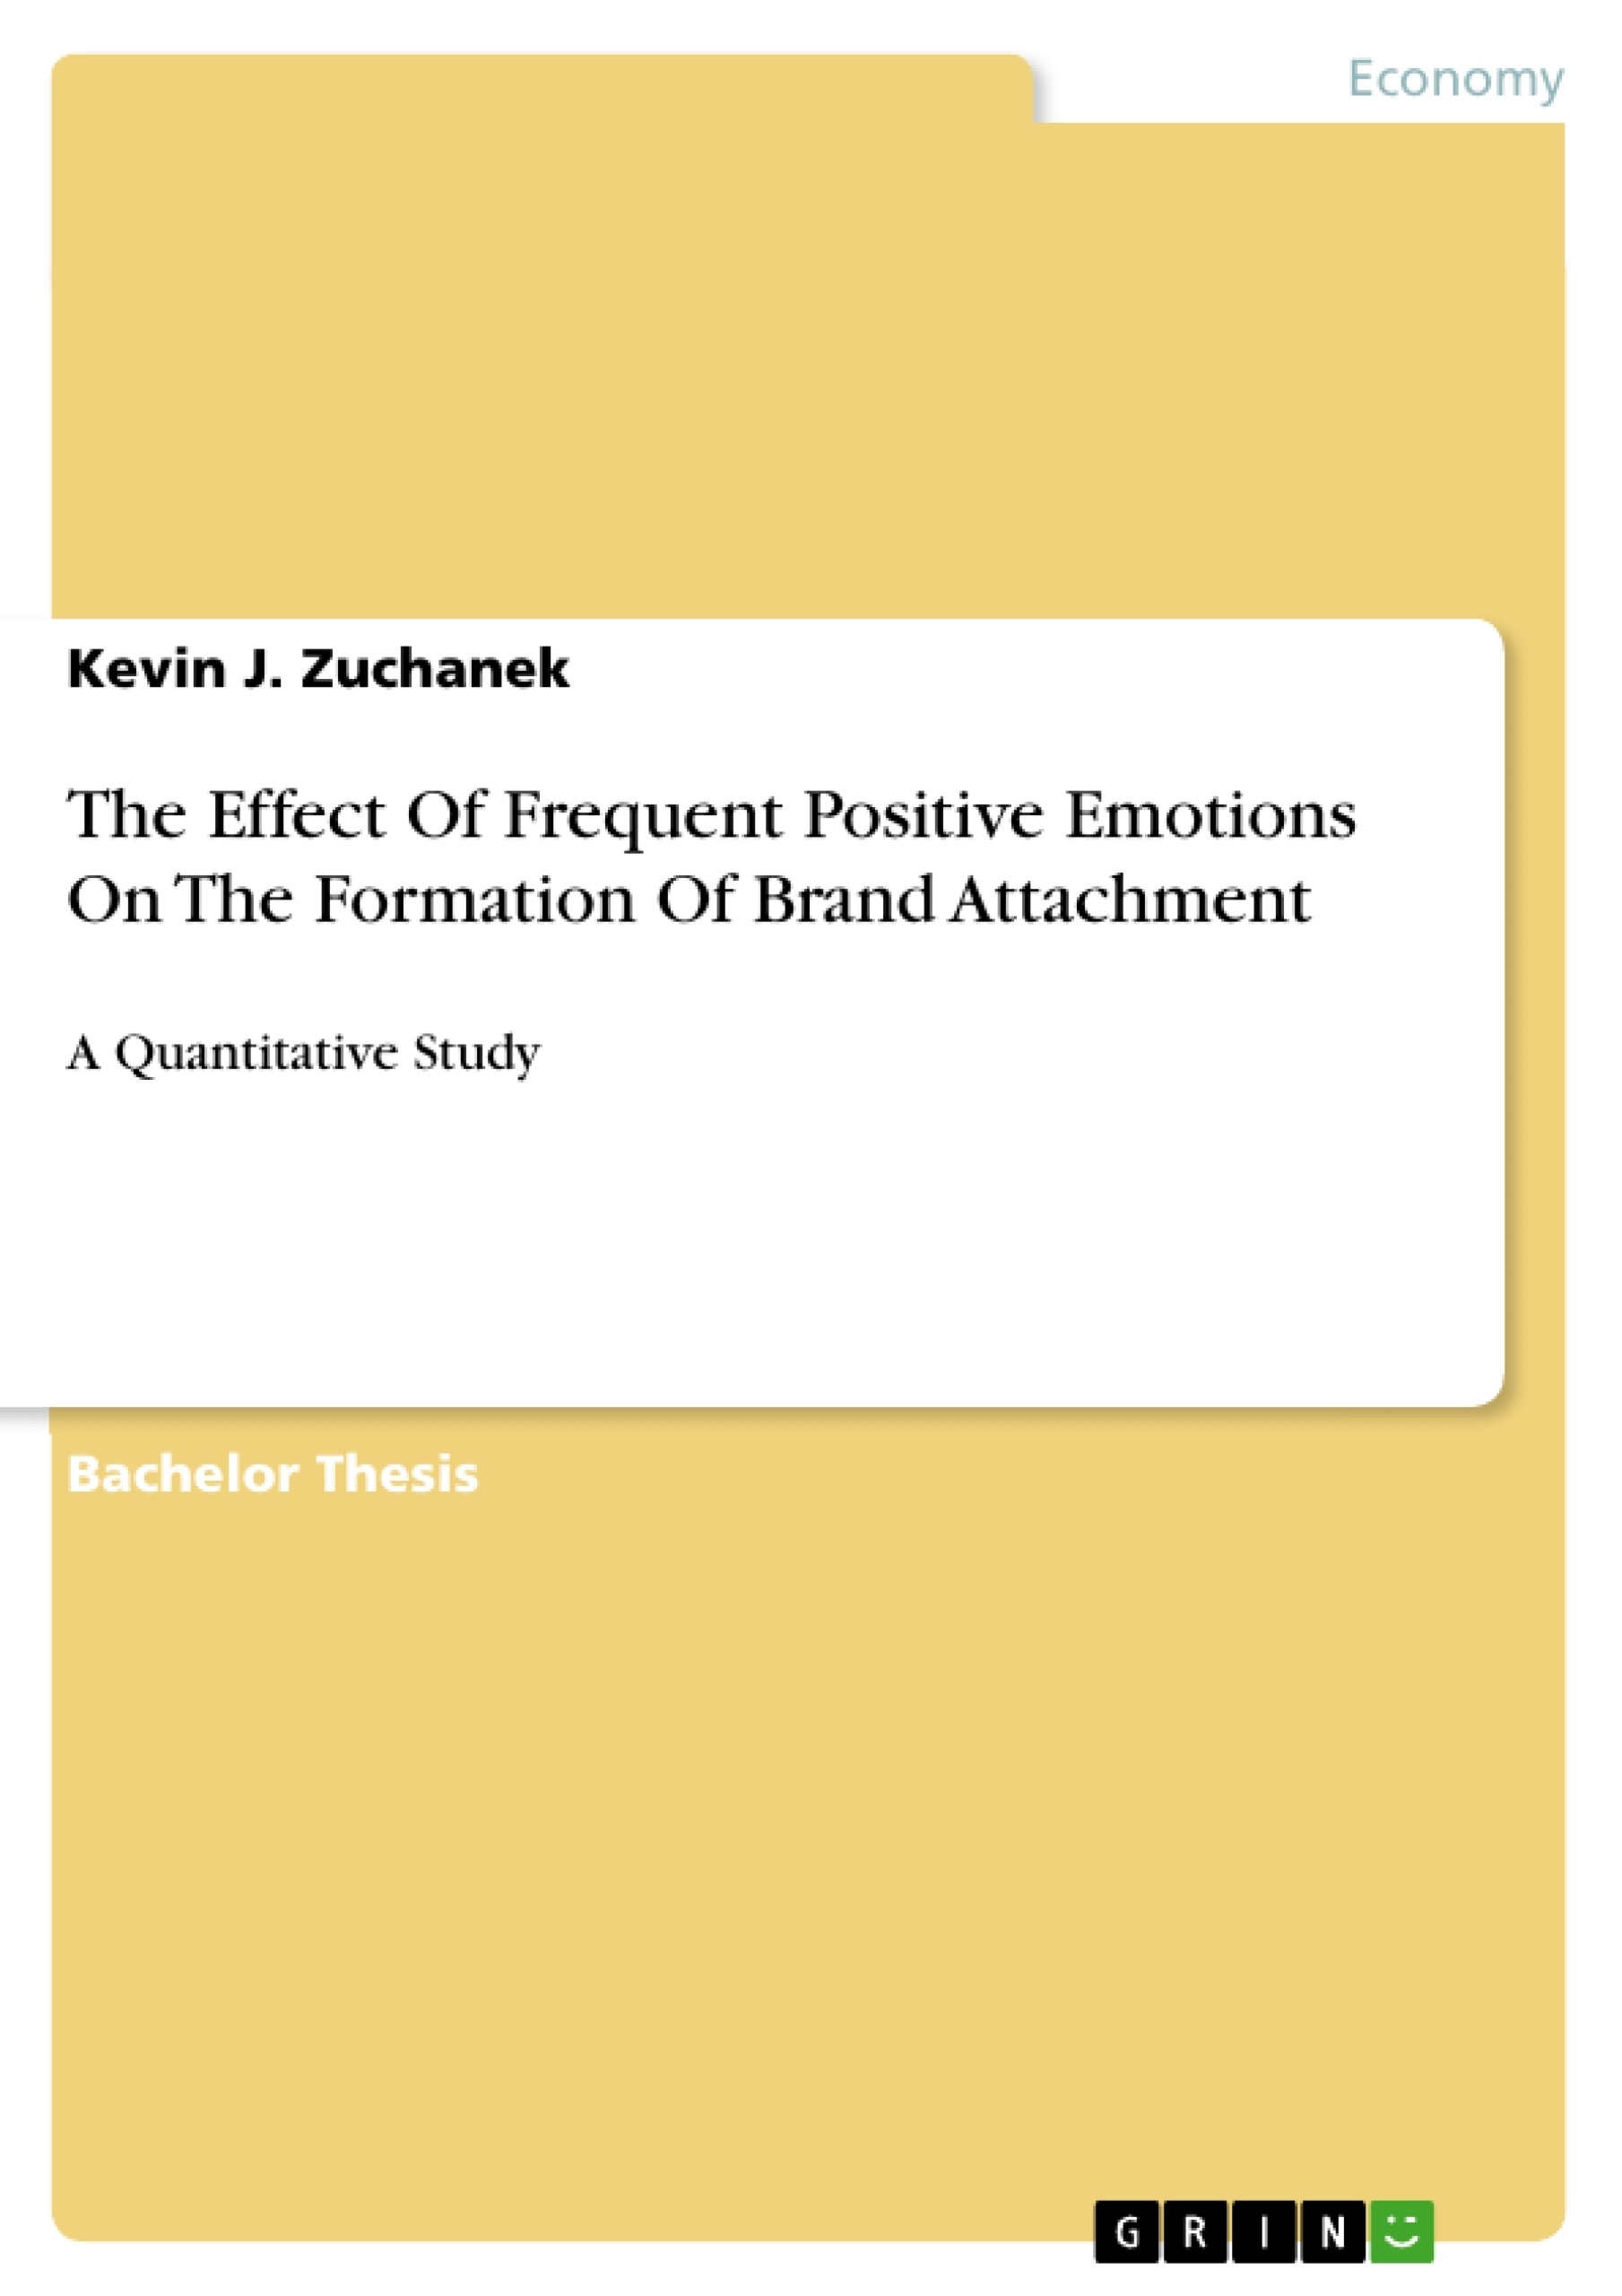 Titre: The Effect Of Frequent Positive Emotions On The Formation Of Brand Attachment